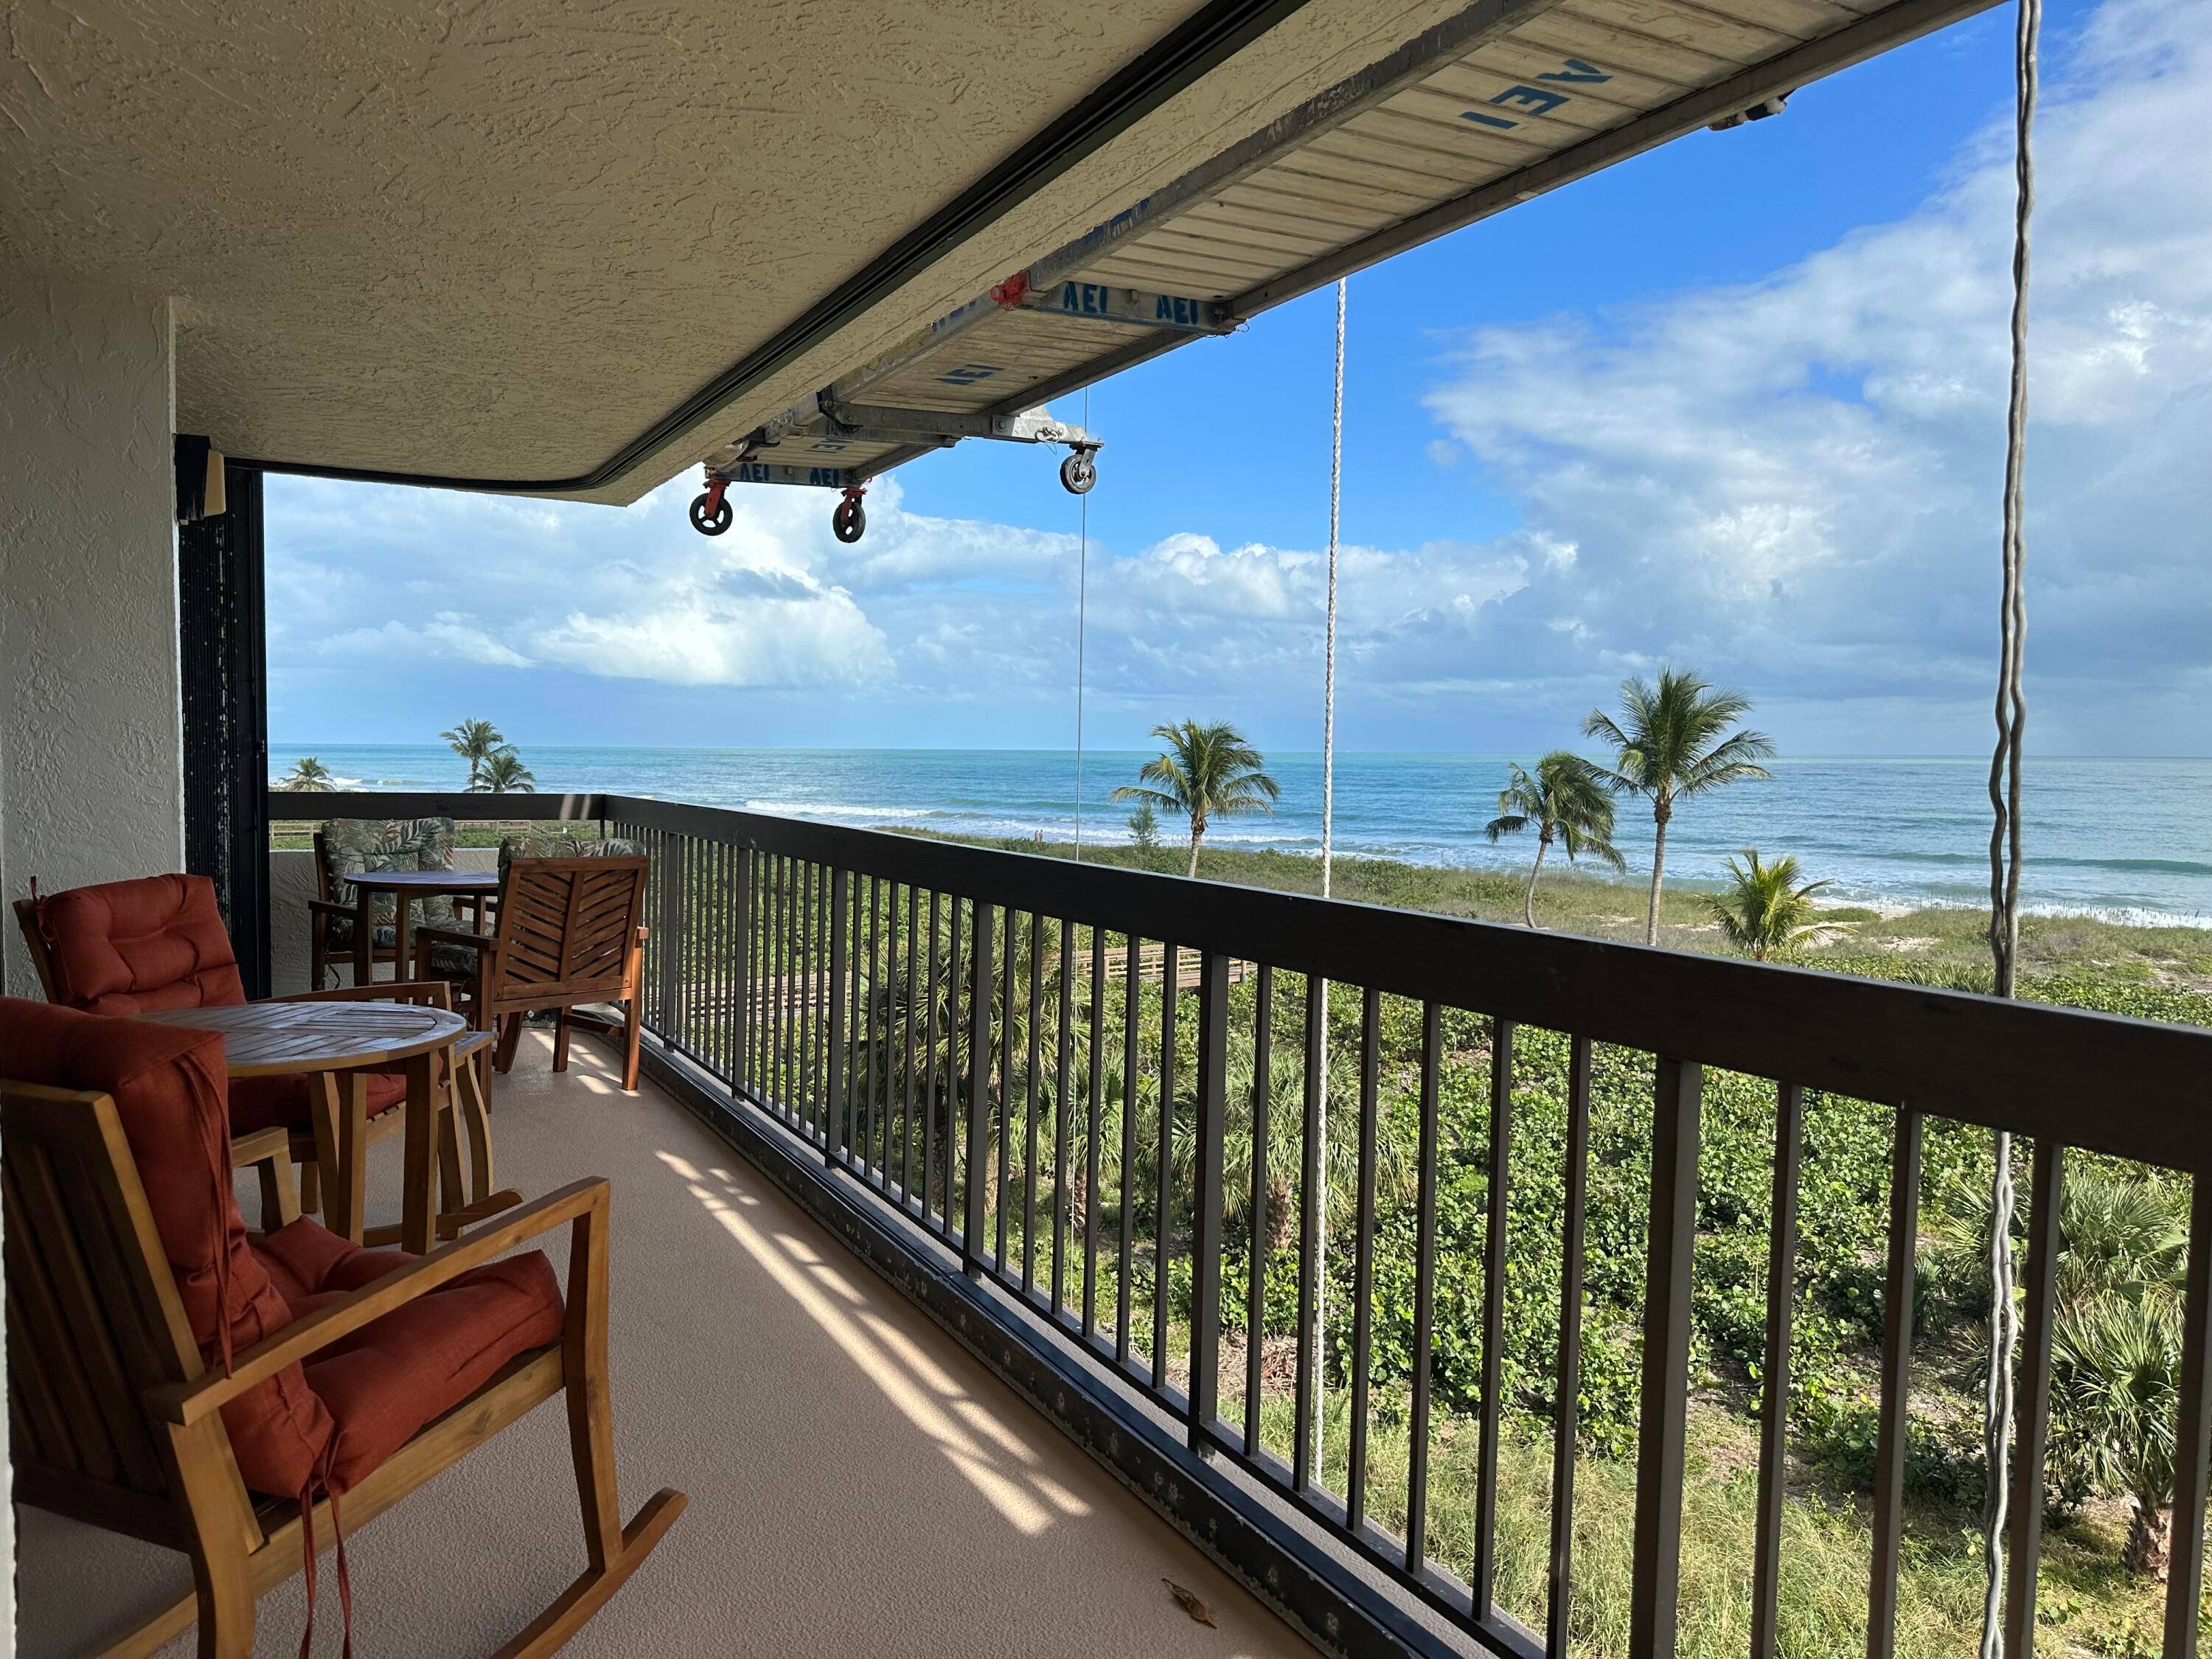 Annual or Seasonal Beautifully furnished oceanfront condo.